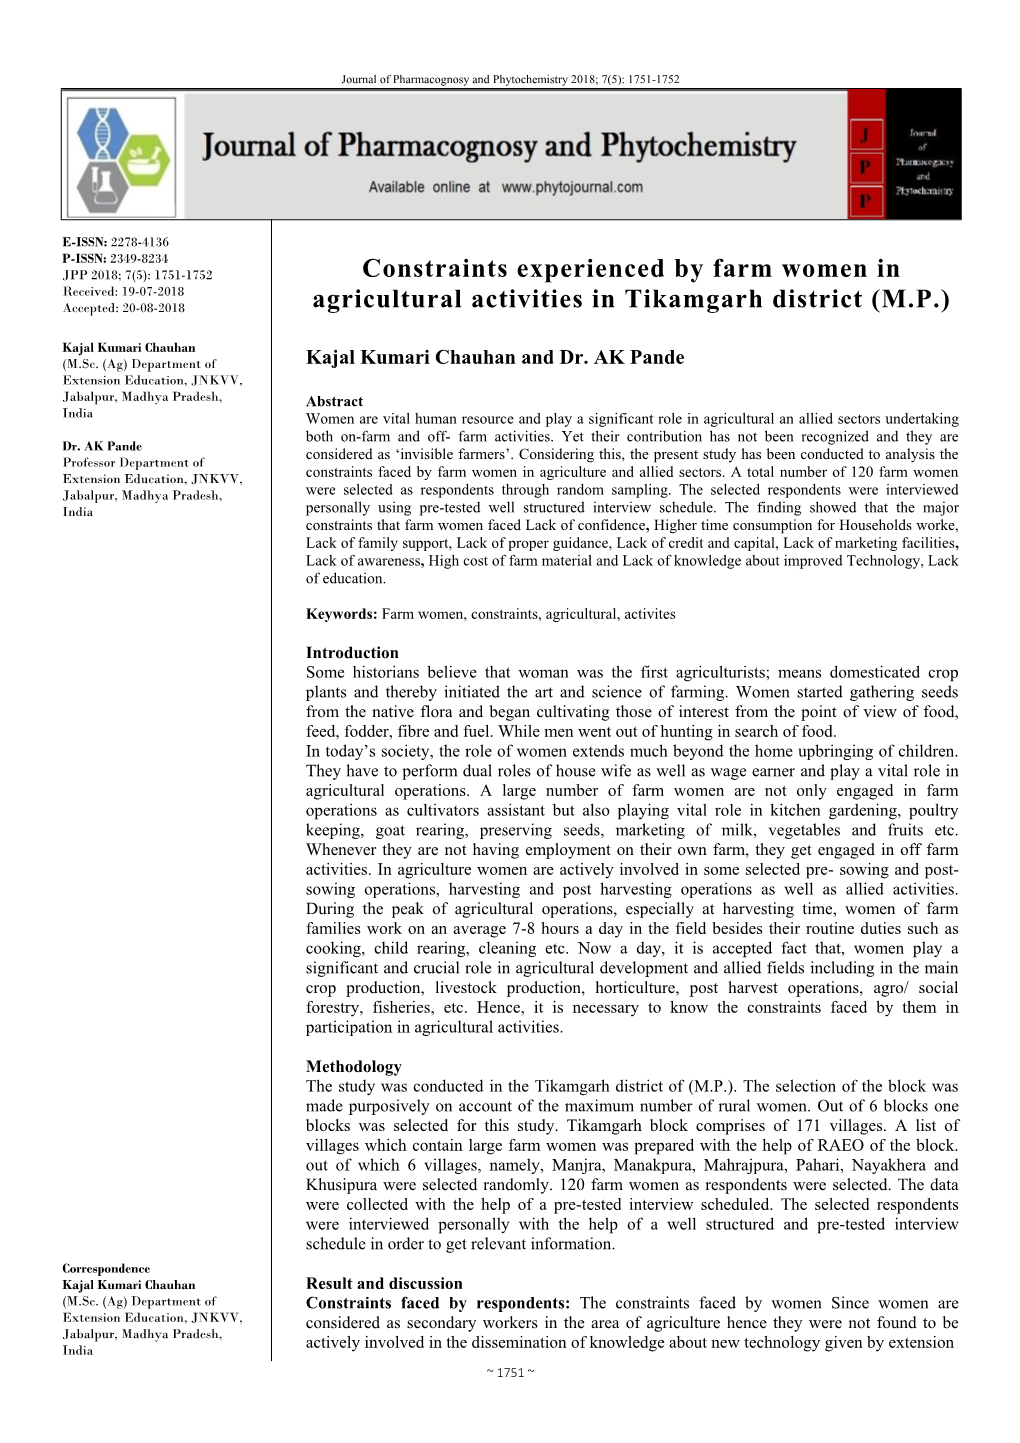 Constraints Experienced by Farm Women in Agricultural Activities In